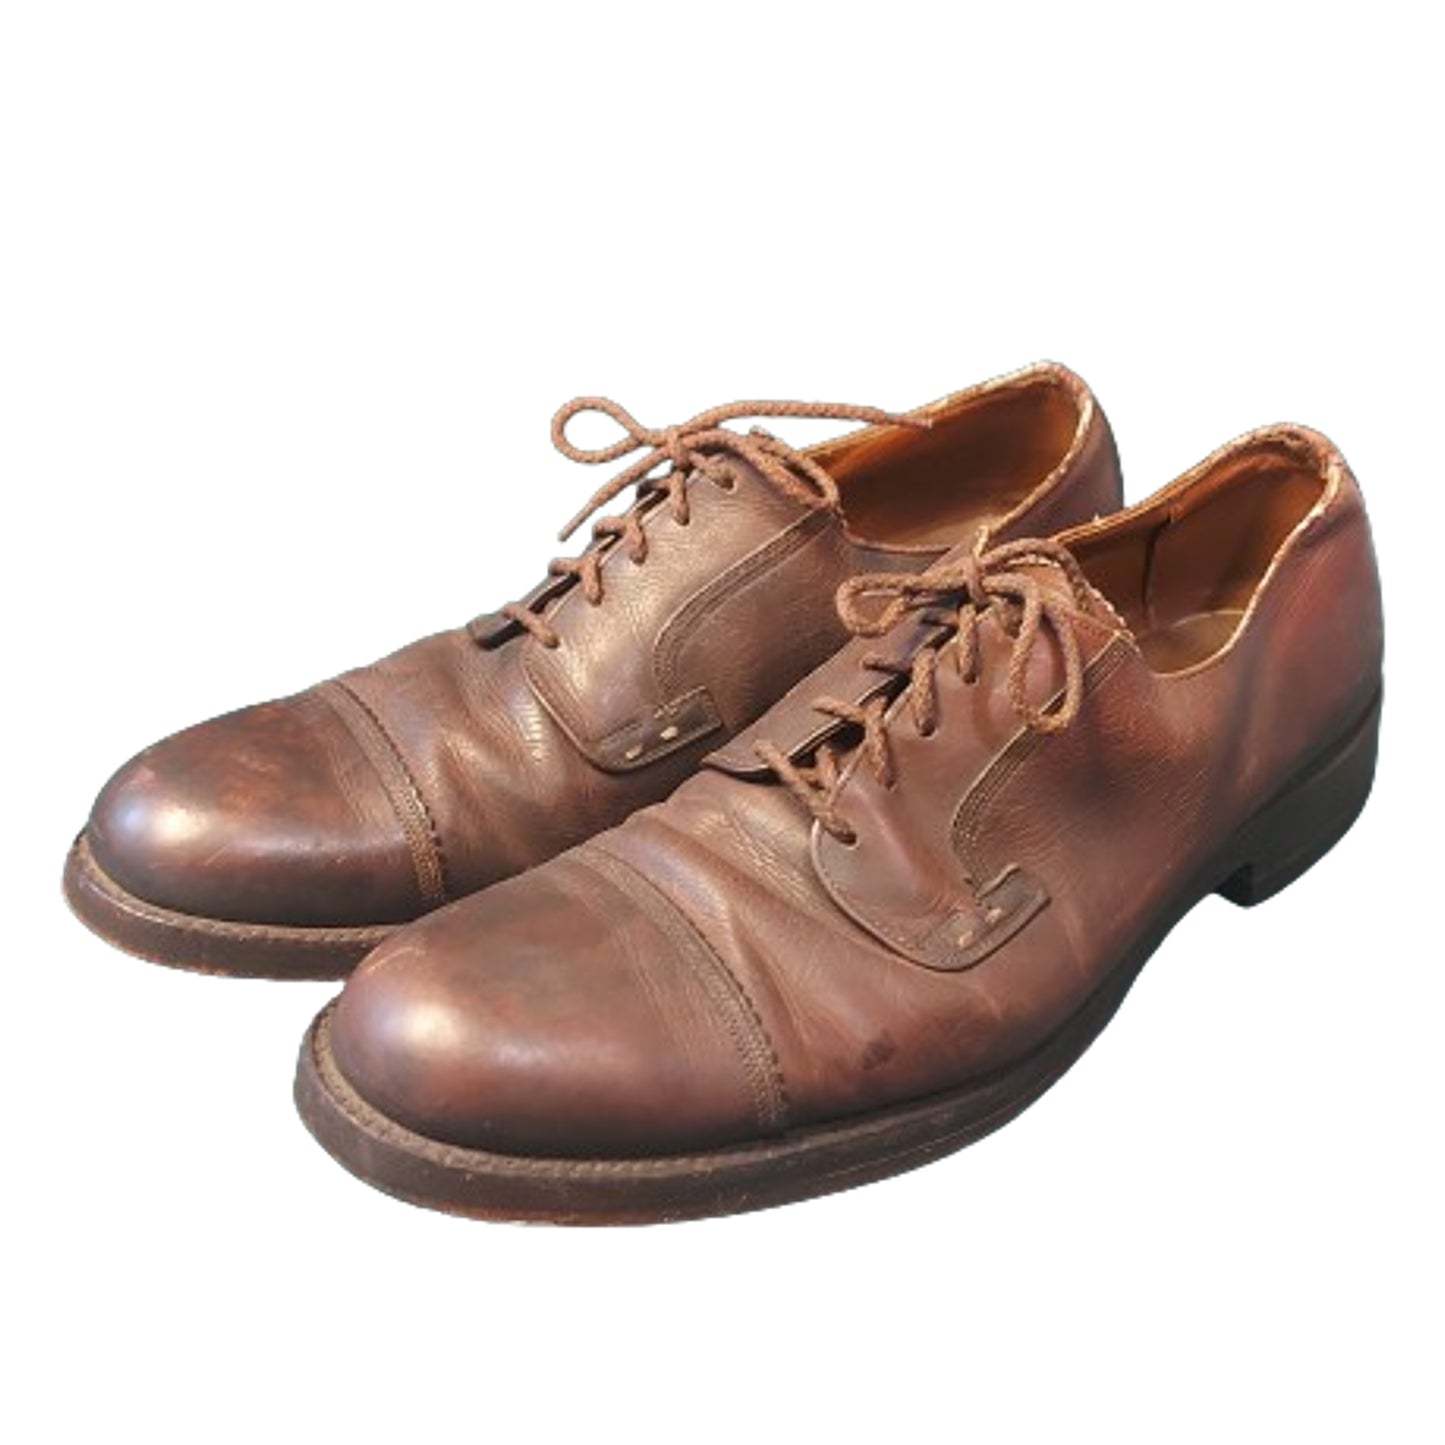 WW2 Canadian Army Officer's Shoes